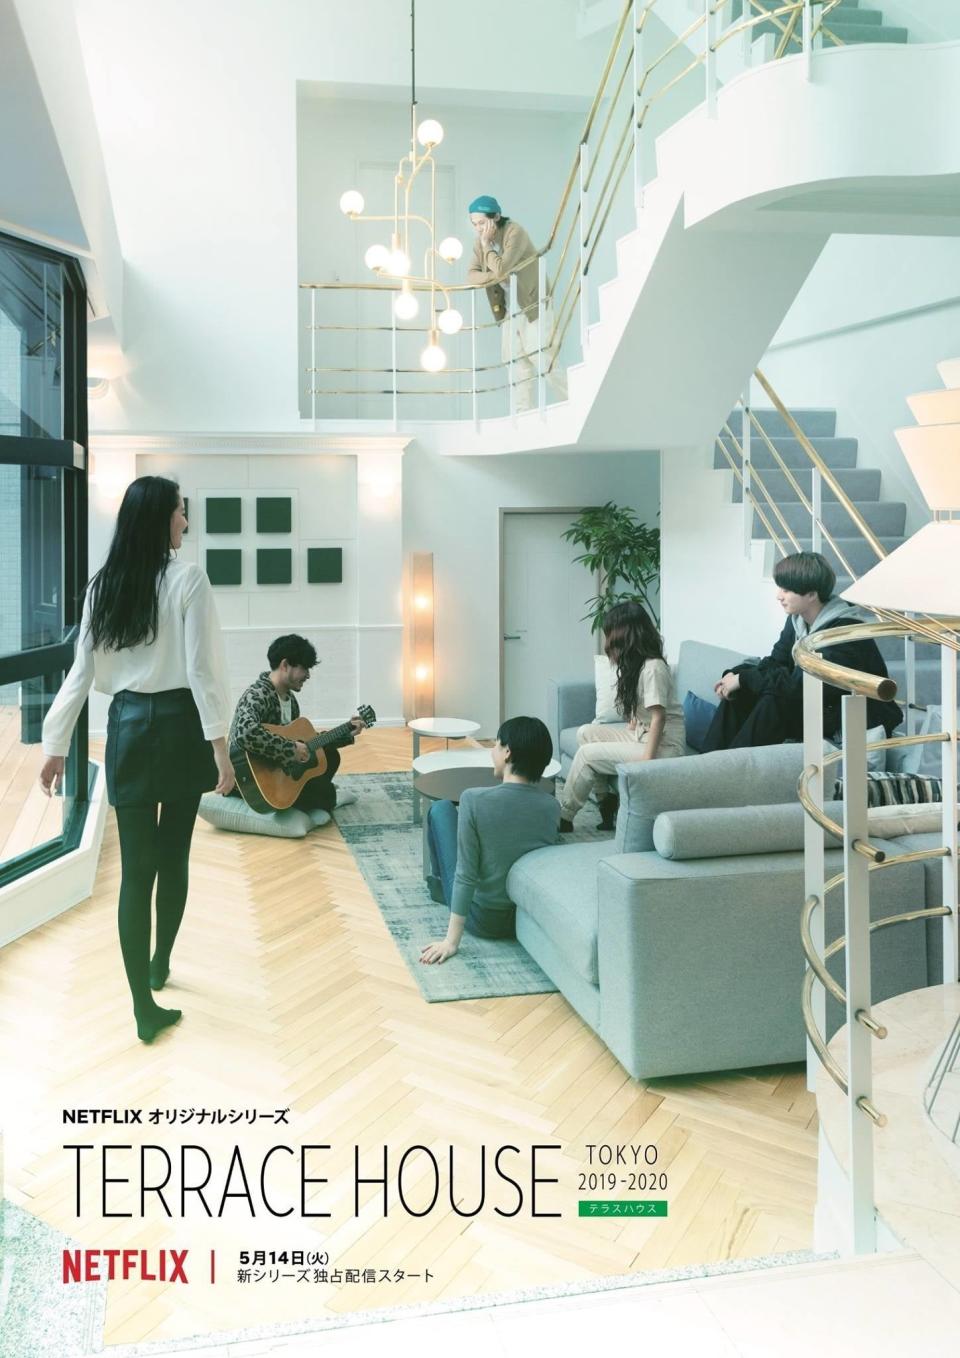 Out of all the shows here, I think Terrace House might be one of the most well known ones mainly because of its various seasons and installments. There’s four  installments on Netflix: In the City, Aloha State, Tokyo, and Opening New Doors. But the concept of the show is essentially the same. All contestants live in a house together and try to find love. Personally, my favorite installment is Terrace House Tokyo (you can almost never go wrong with the original). But, the dynamics of contestants and panelists’ commentary on each season are all interesting to watch. I have to say, this is a Japanese dating reality show and the show allowed me to learn more about Japanese culture. Definitely a must-watch for those looking for a more casual dating reality show! You can watch all of the season on Netflix.